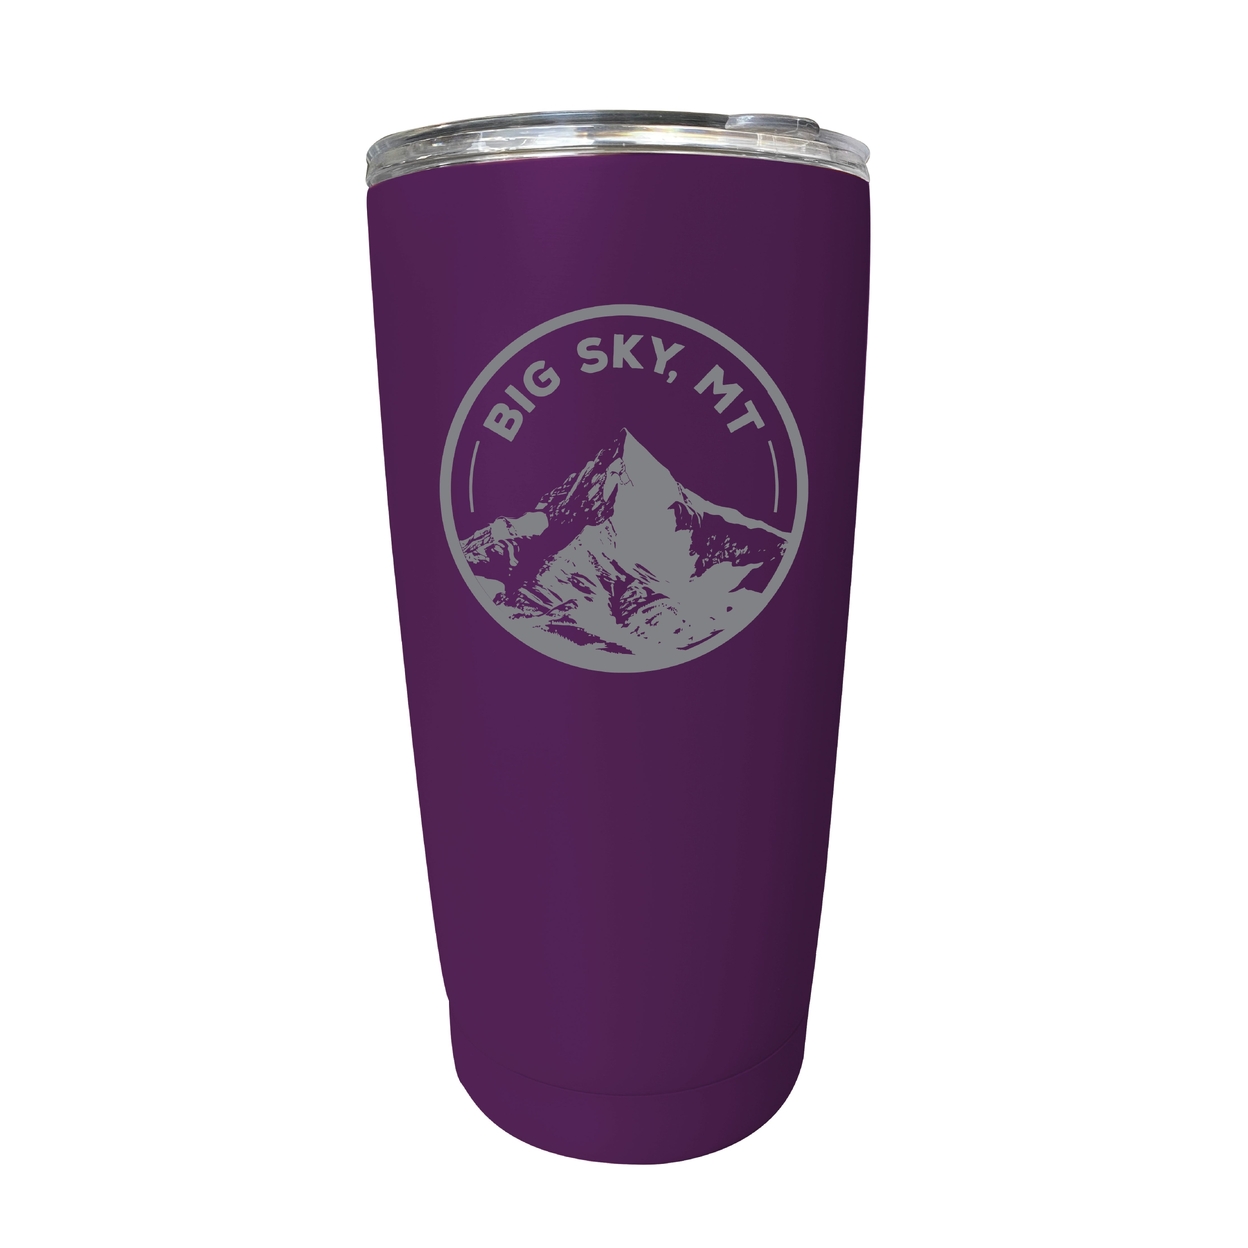 Big Sky Montana Souvenir 16 Oz Engraved Stainless Steel Insulated Tumbler - Black,,2-Pack